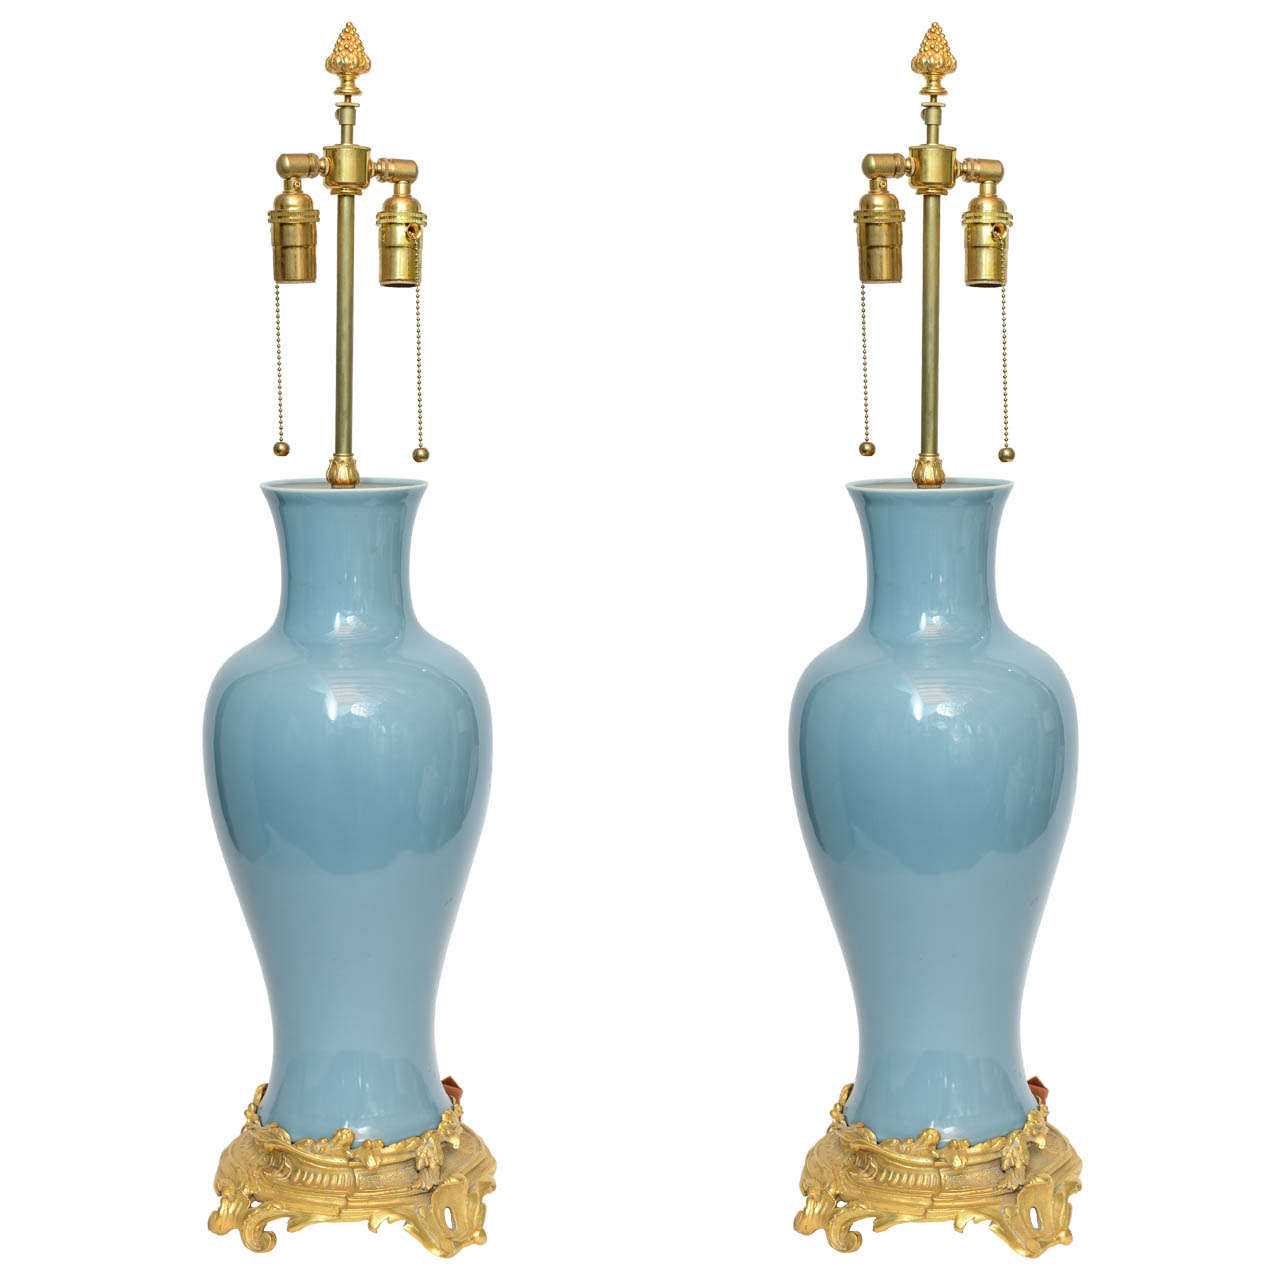 A pair of powder blue glazed Chinese porcelain bronze base mounted lamps. Height - 22